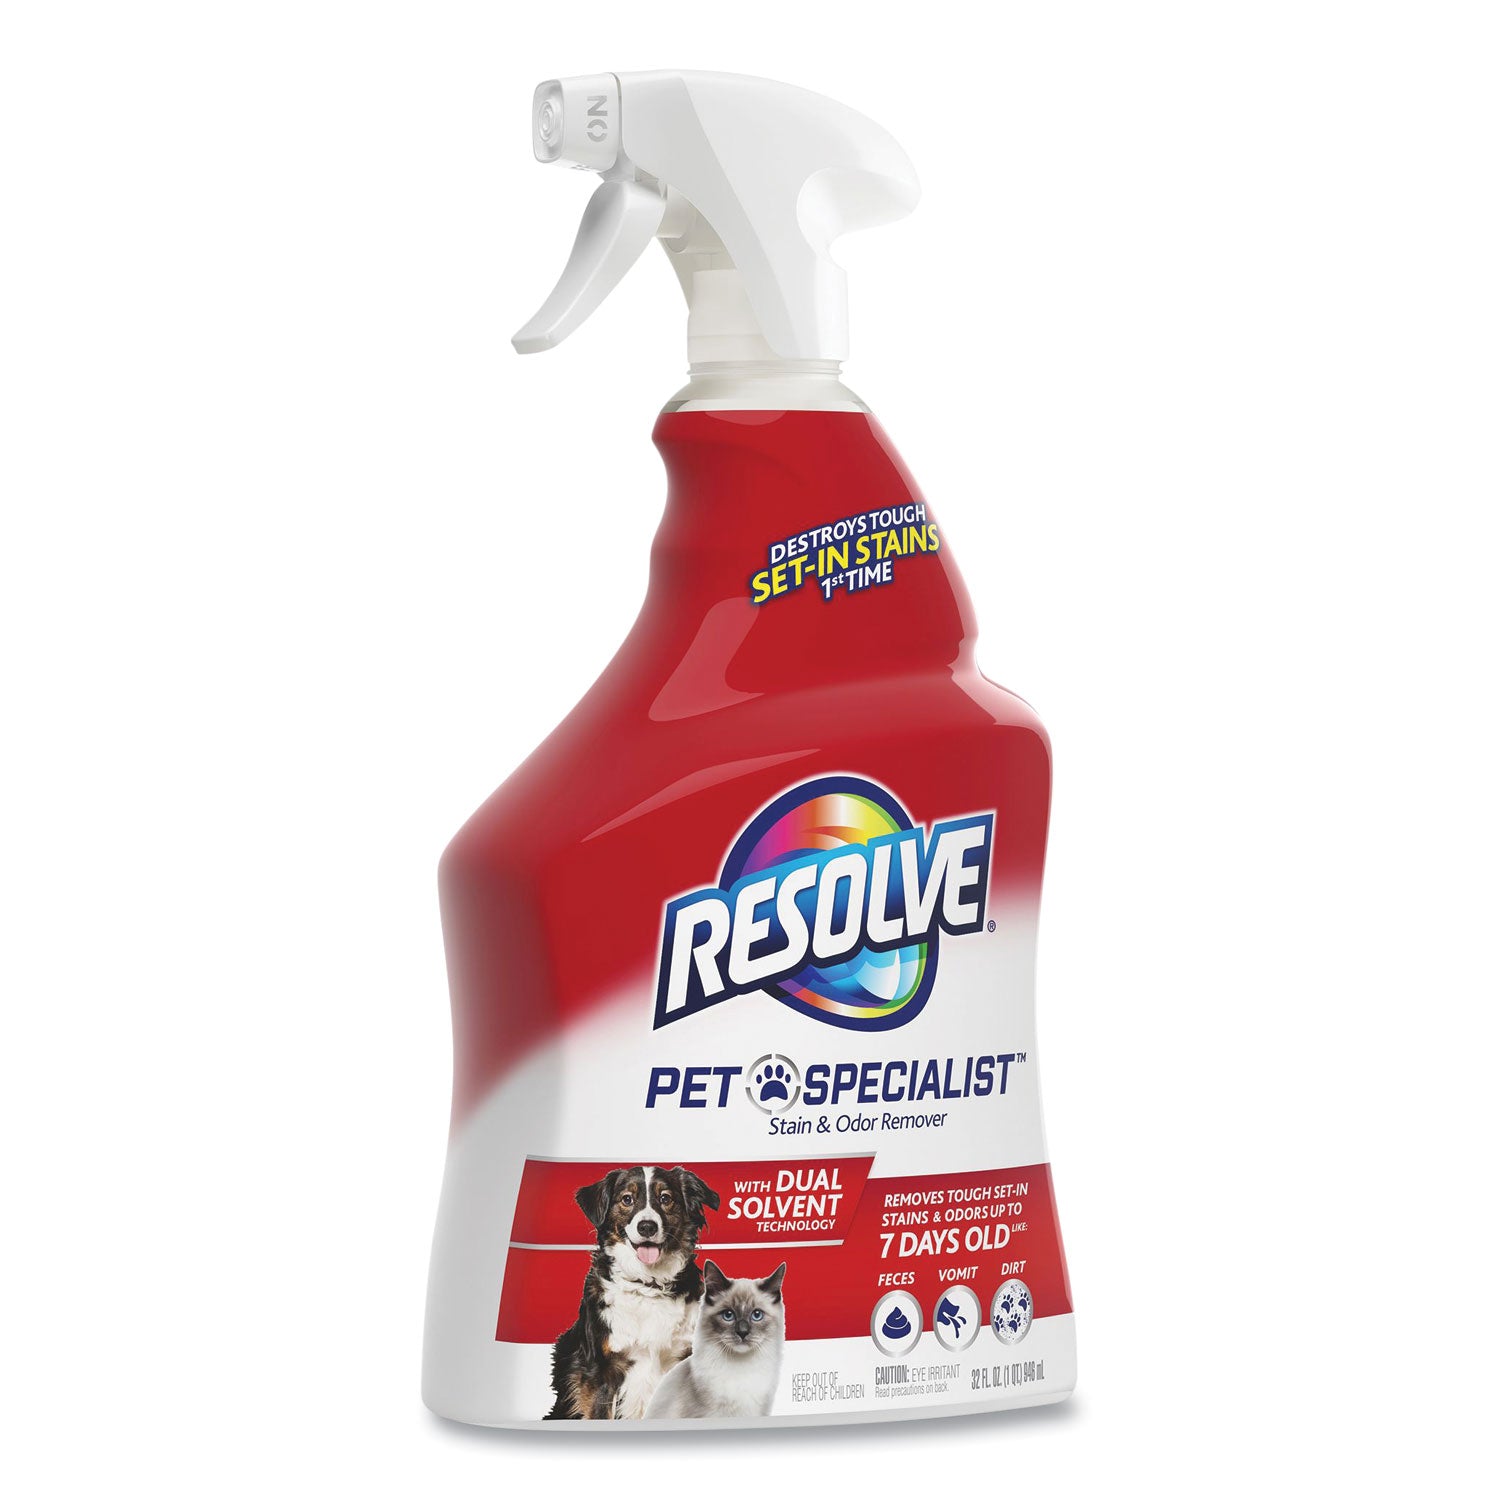 pet-specialist-stain-and-odor-remover-citrus-32-oz-trigger-spray-bottle-12-carton_rac99850ct - 4